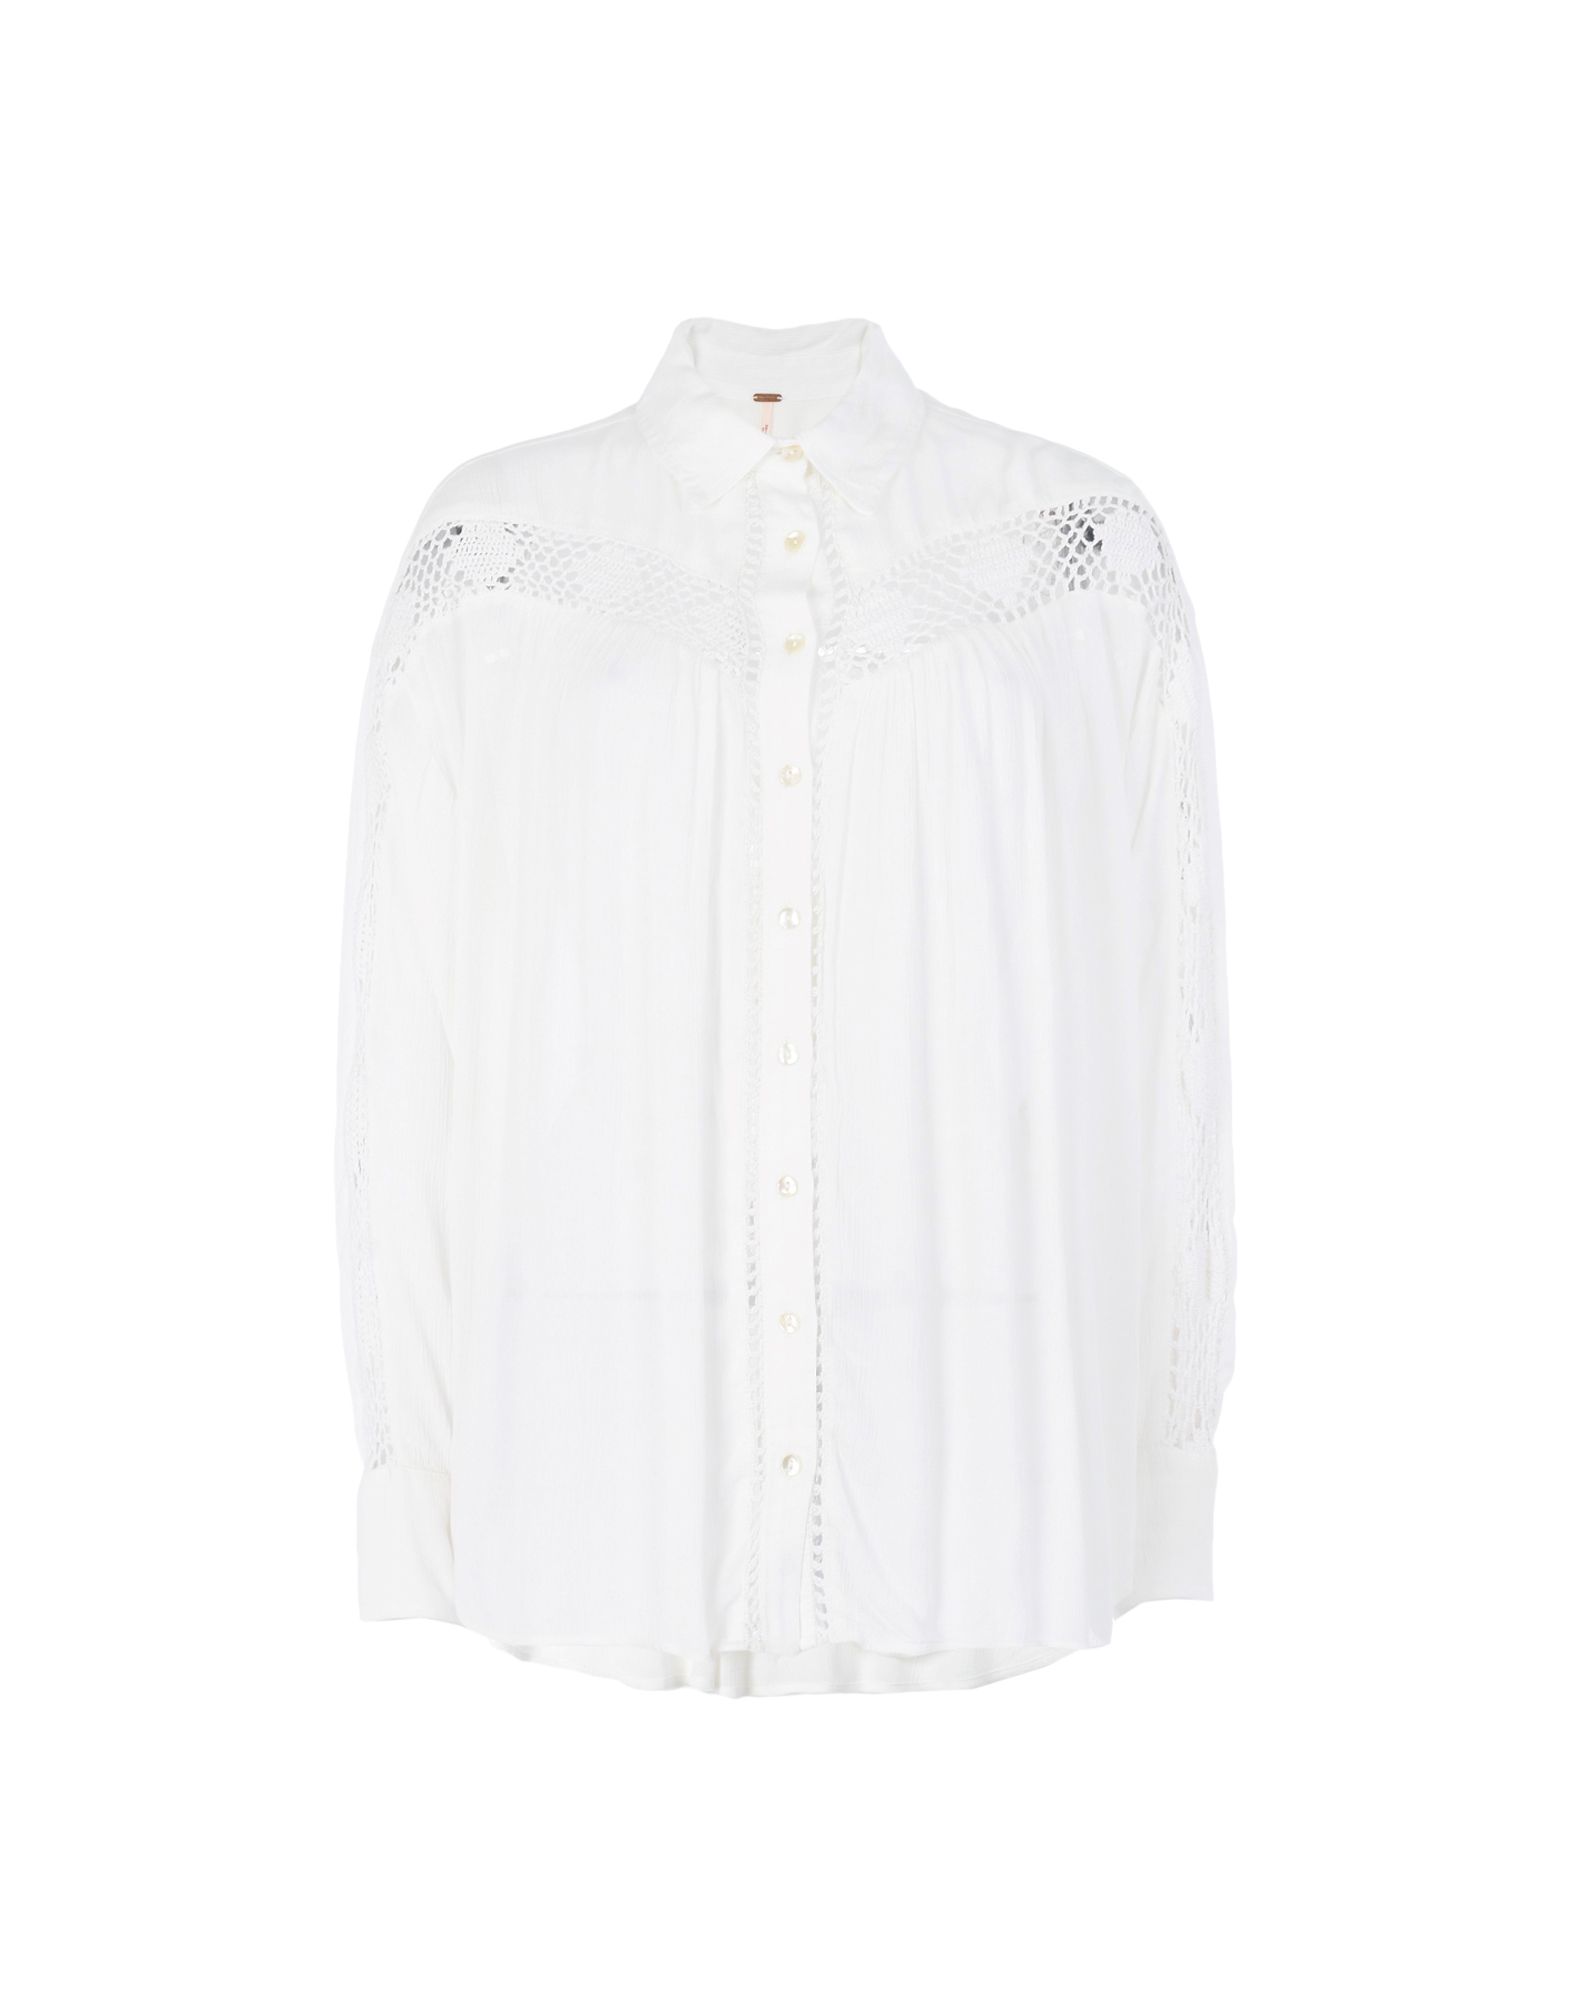 FREE PEOPLE Lace shirts & blouses,12197137JV 3